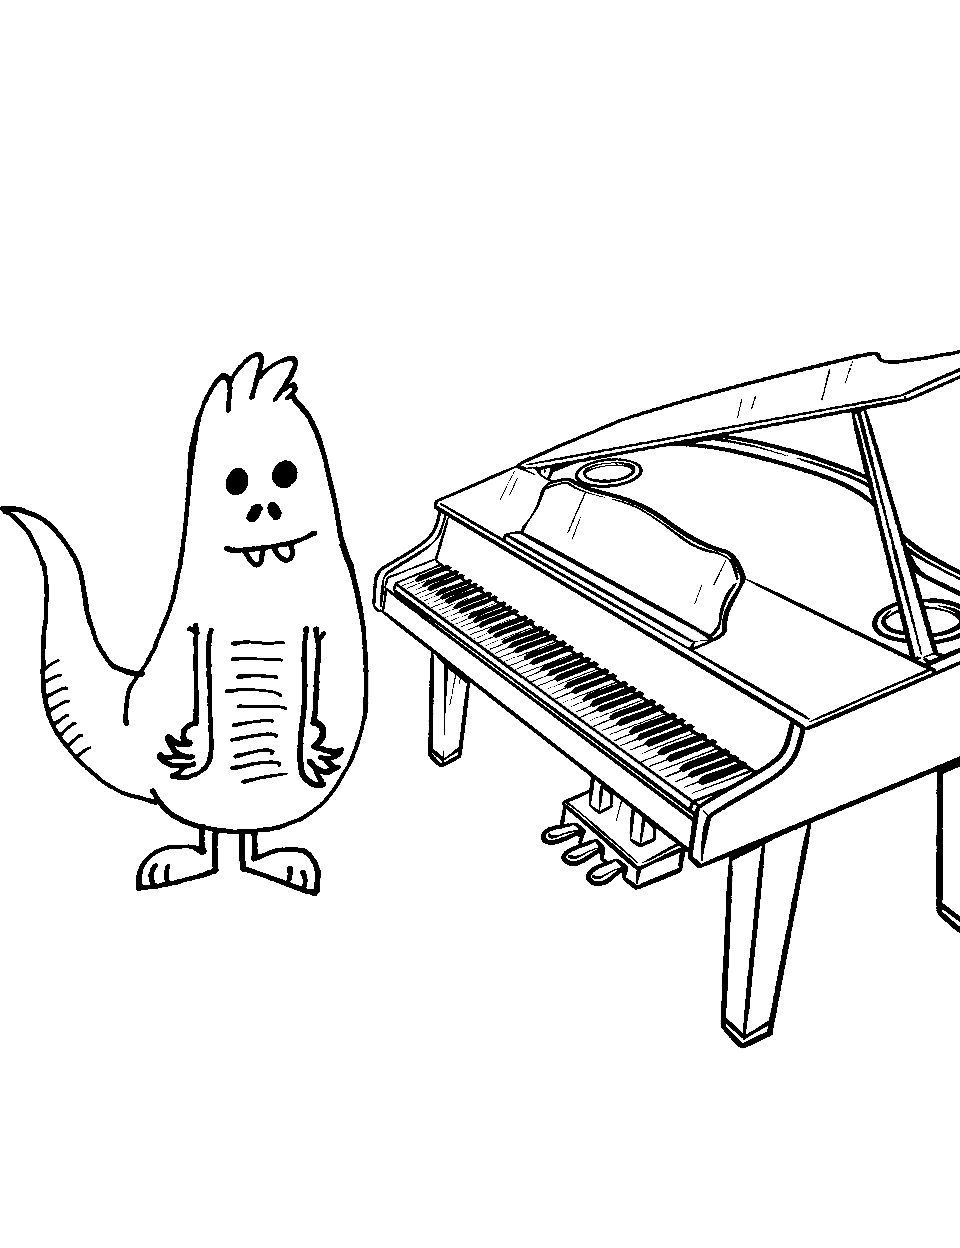 Monster Playing the Piano Coloring Page - A musical monster ready to play a beautiful tune in his piano.